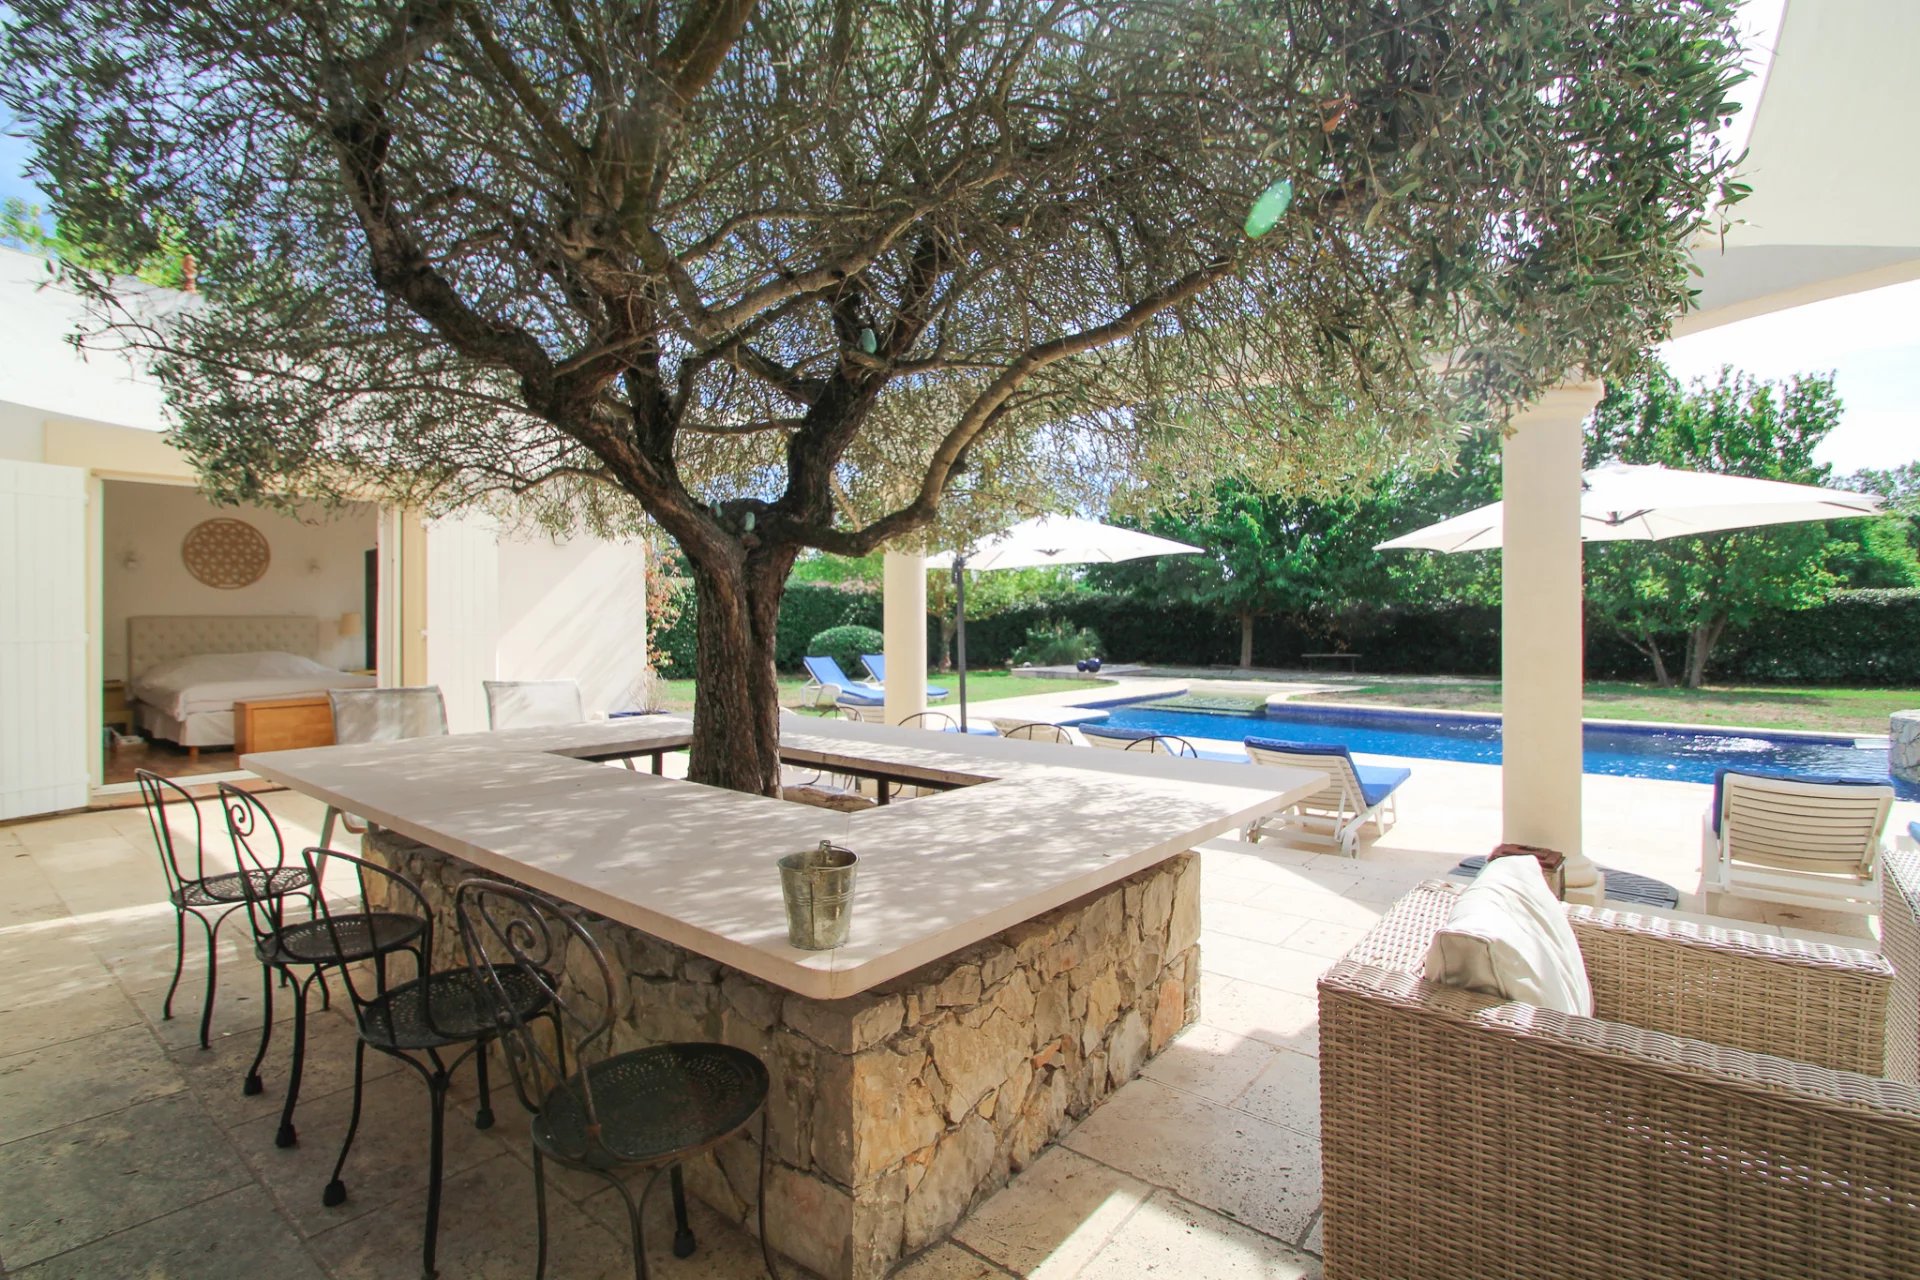 Magnificent single-storey villa with swimming pool on 3000 m² of land